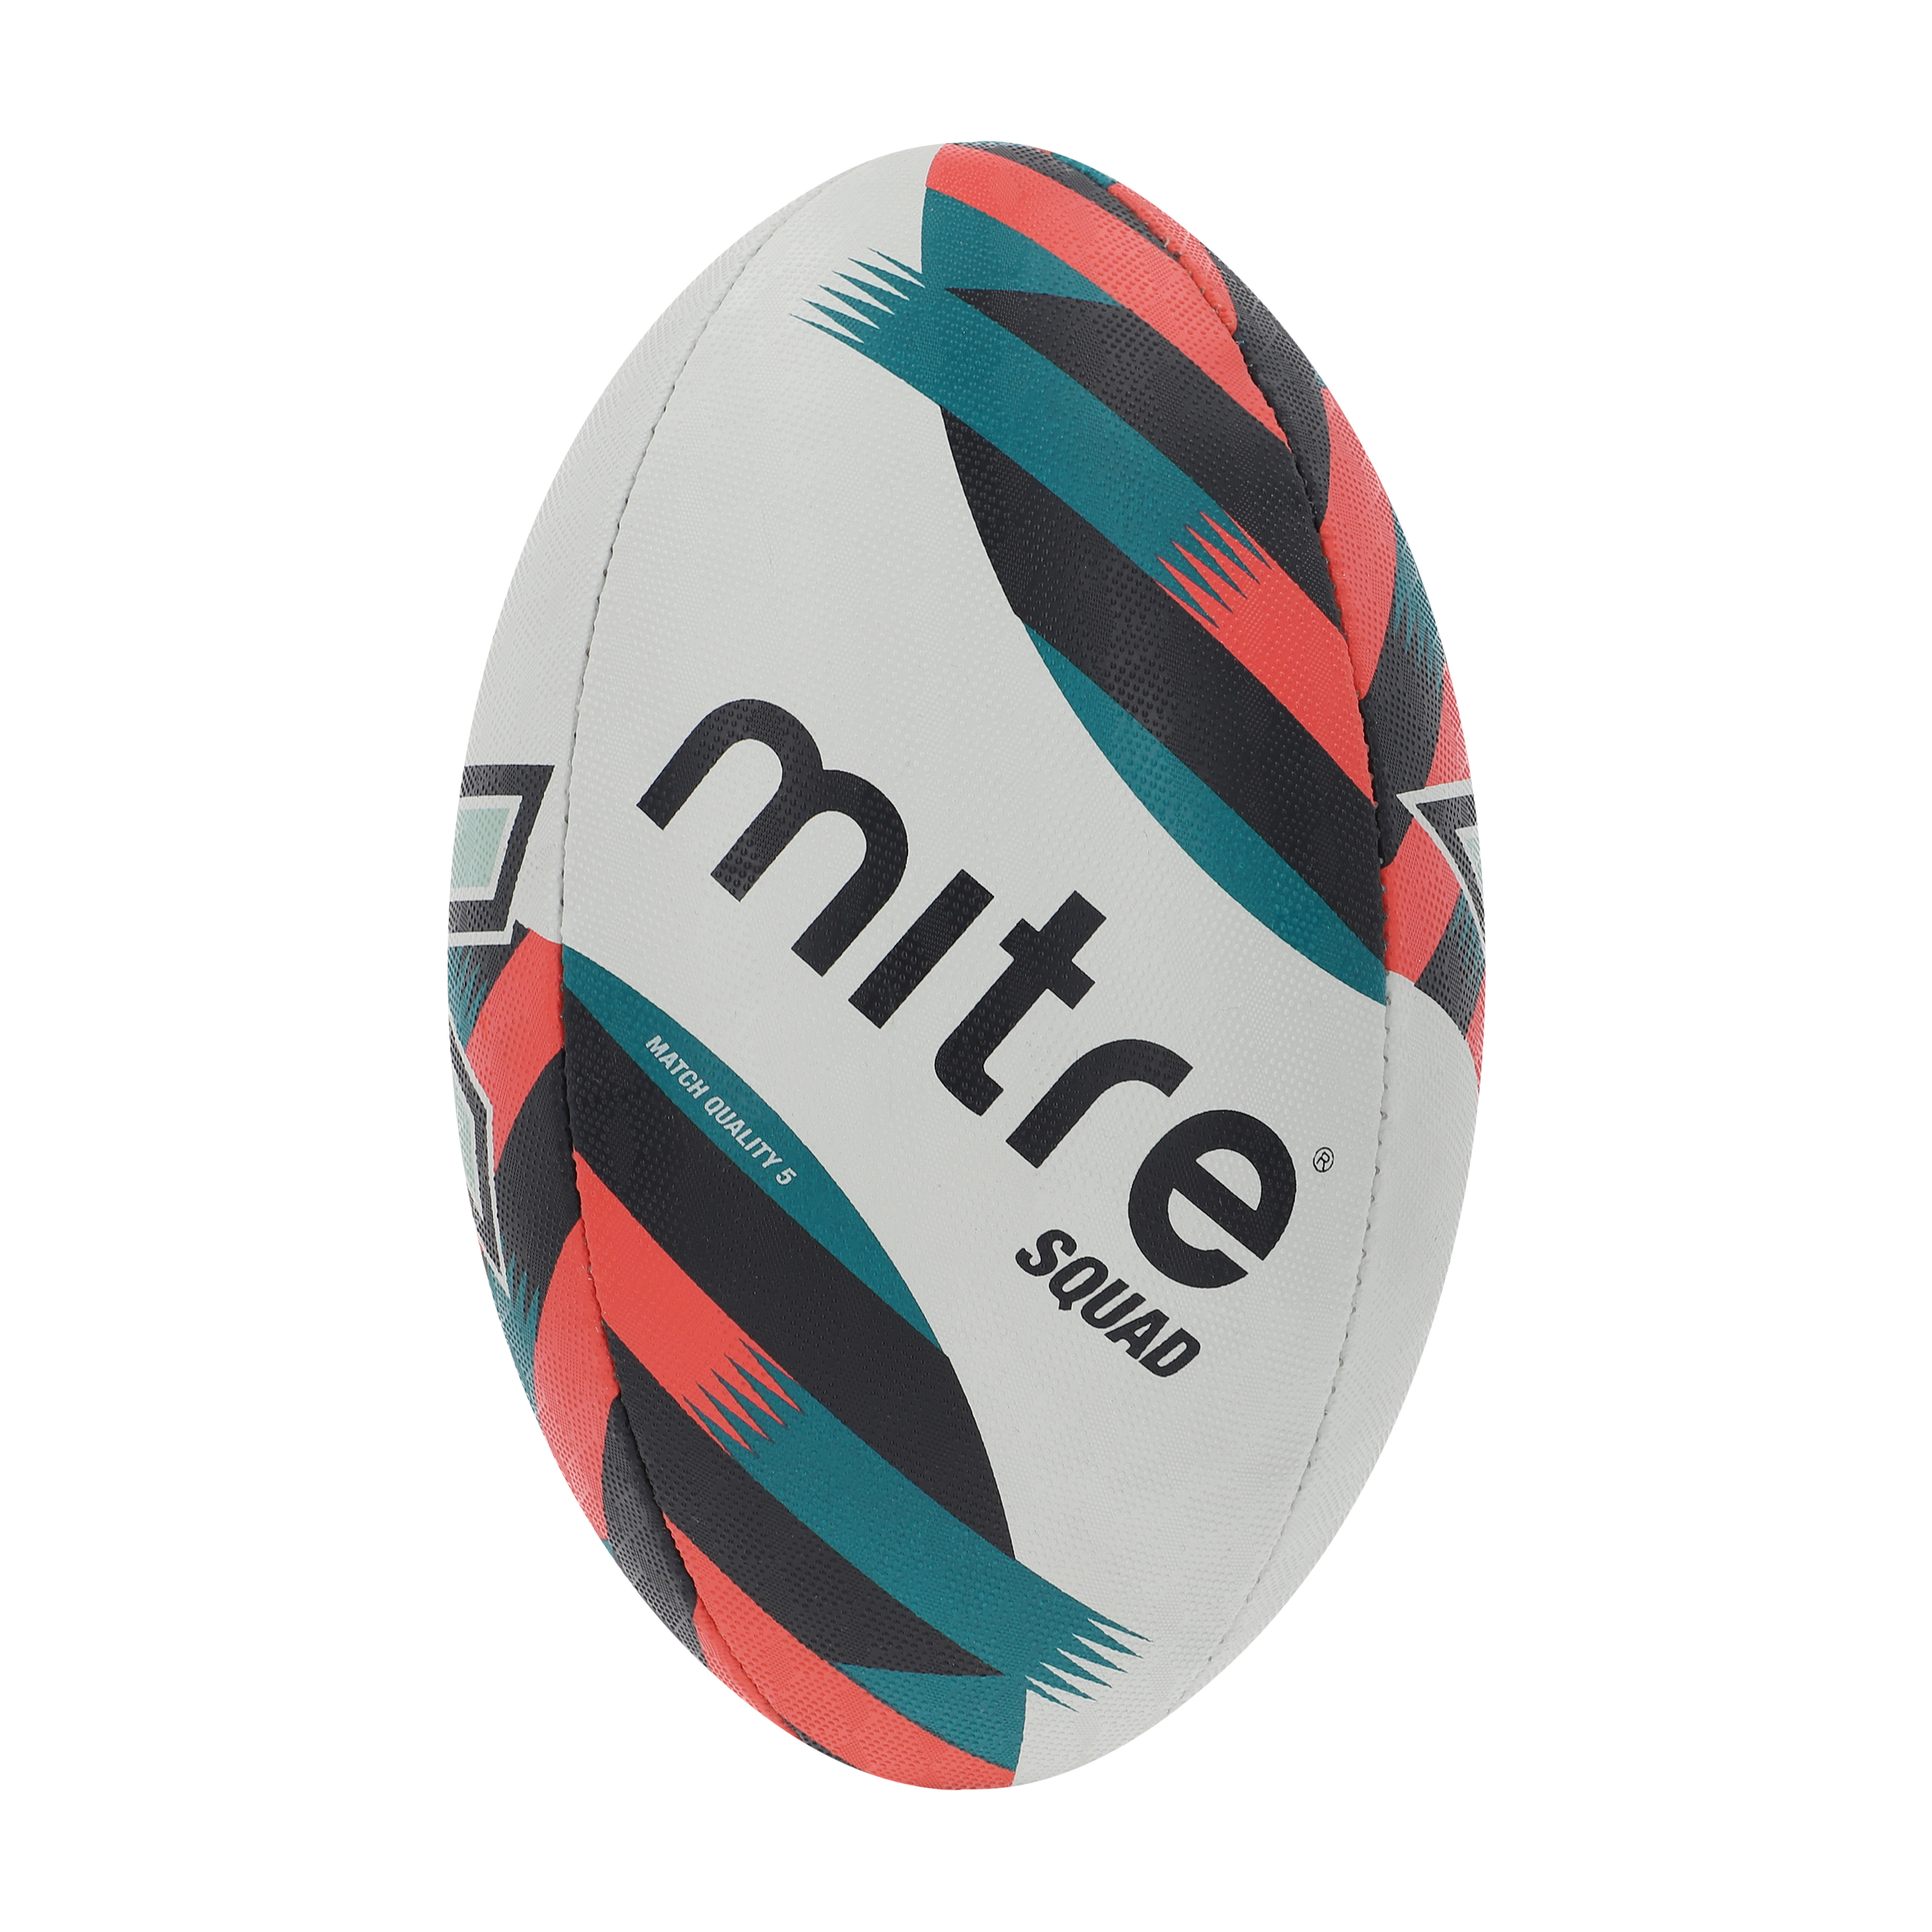 Mitre Squad Rugby Ball - Pack of 12 with